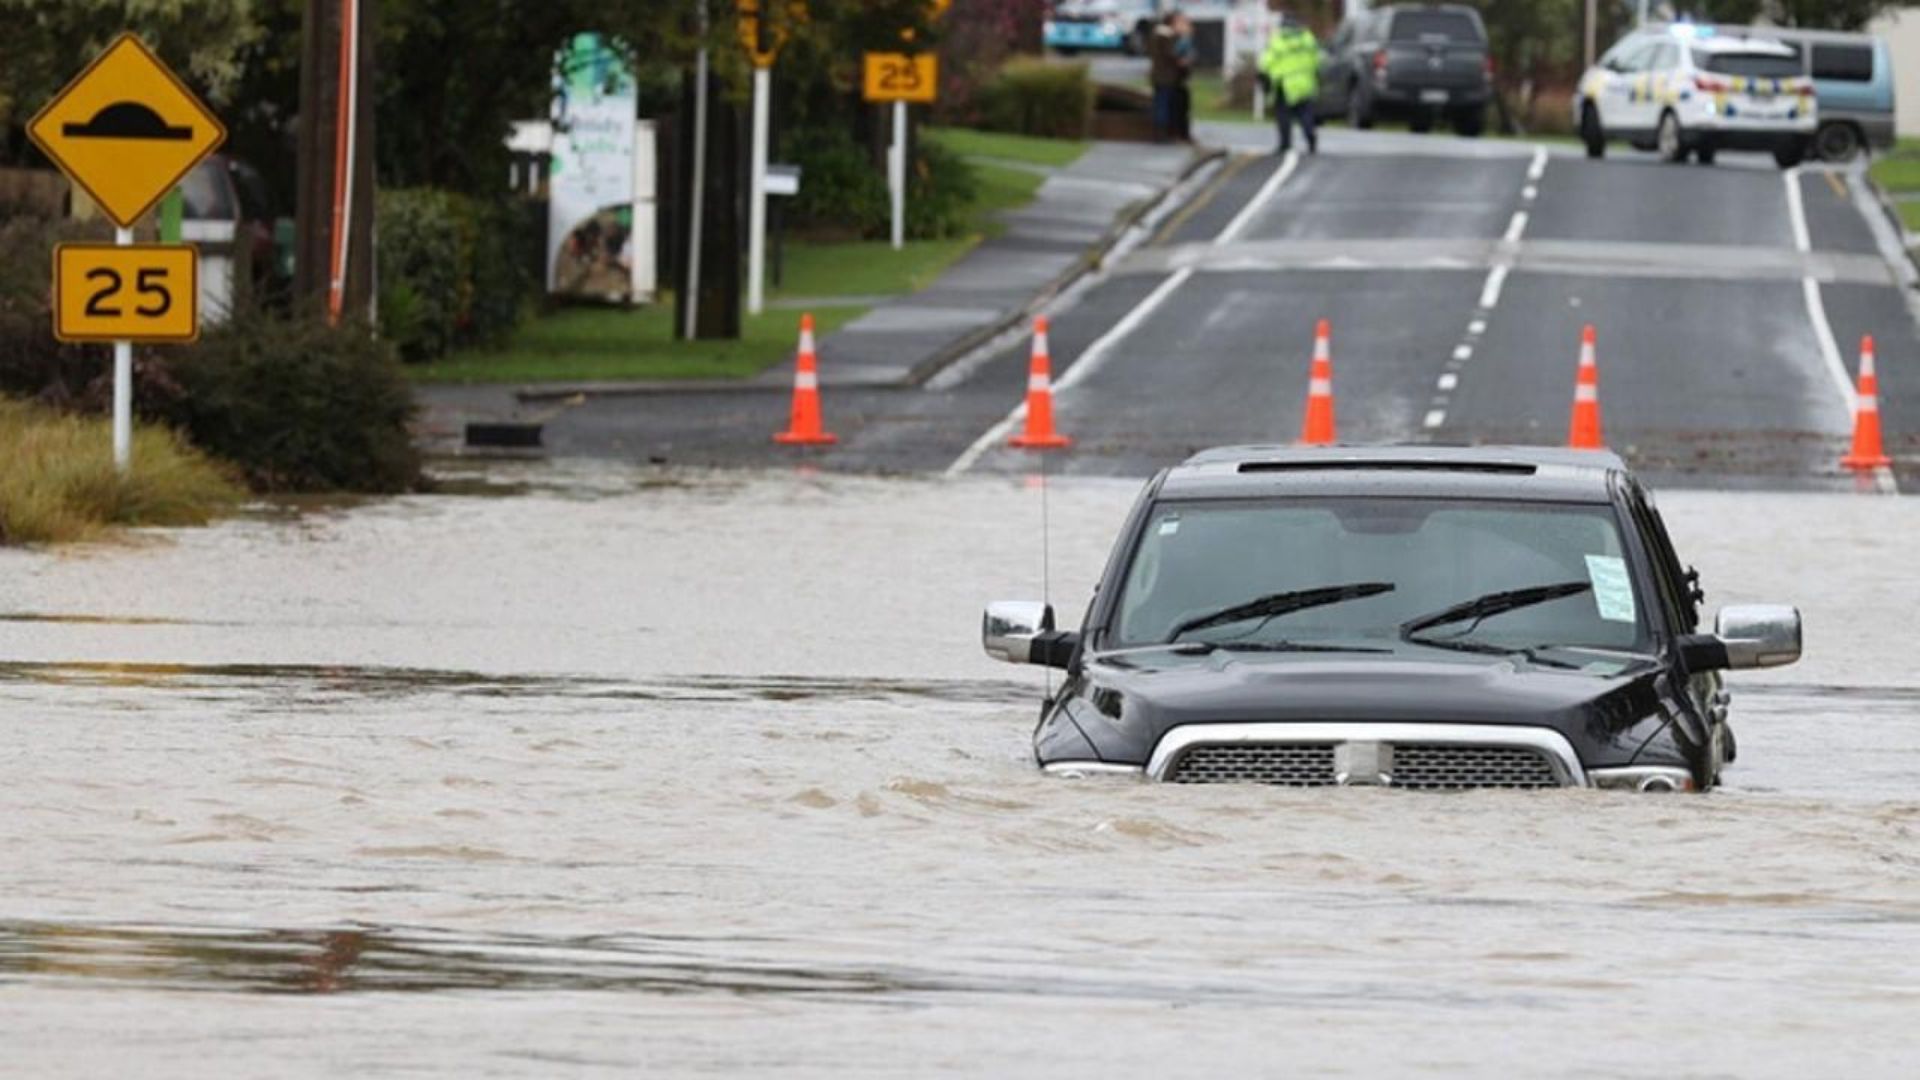 auckland flooding, where to get help, severe weather in Auckland, rain warnings